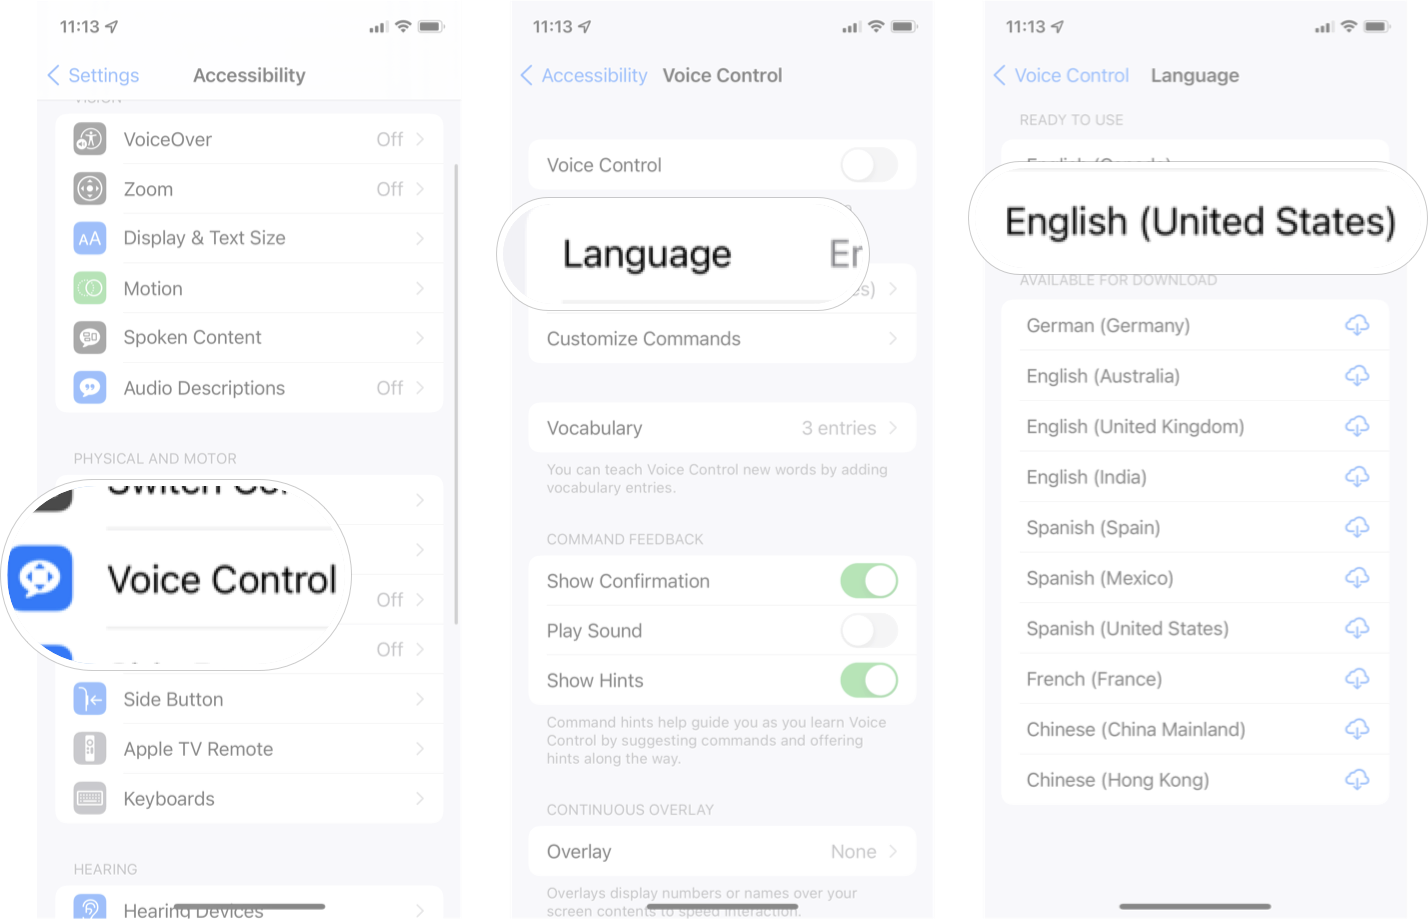 How To Change Voice Control Language iOS: Launch Settings, tap Accessibility, tap Voice Control, and then ta the language you want. 